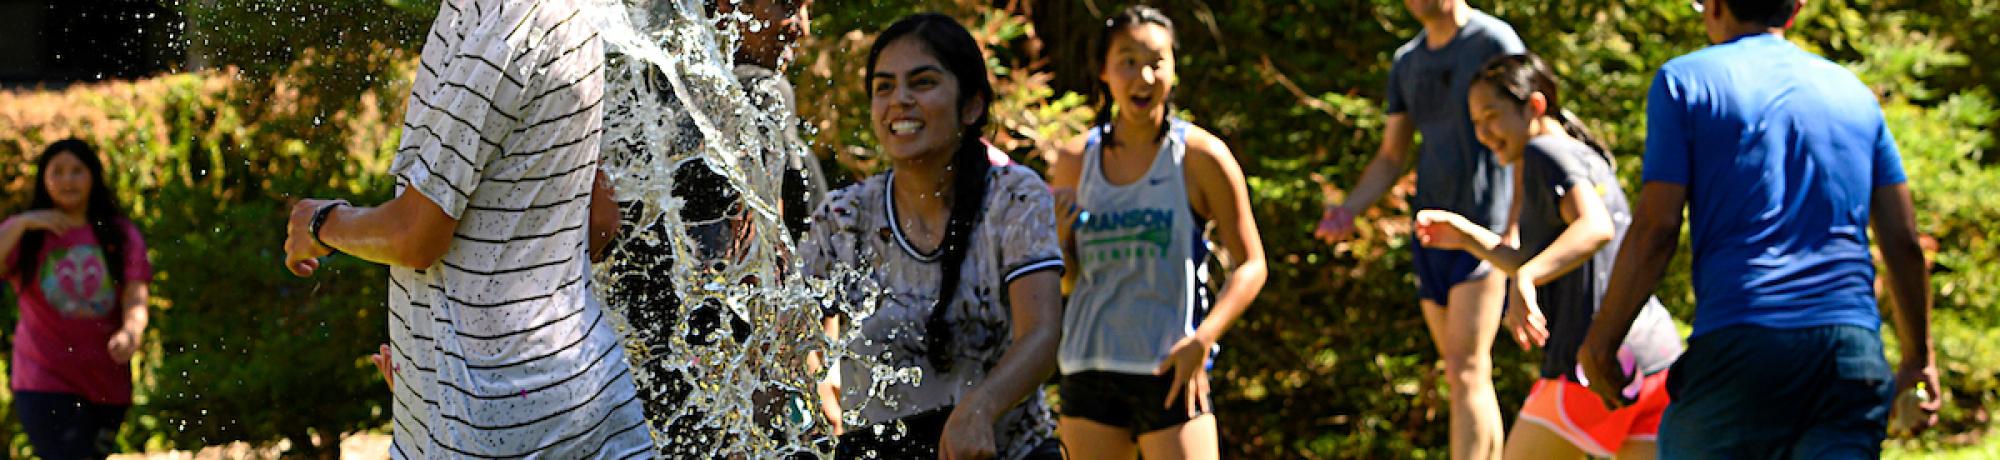 Students in a water balloon fight.